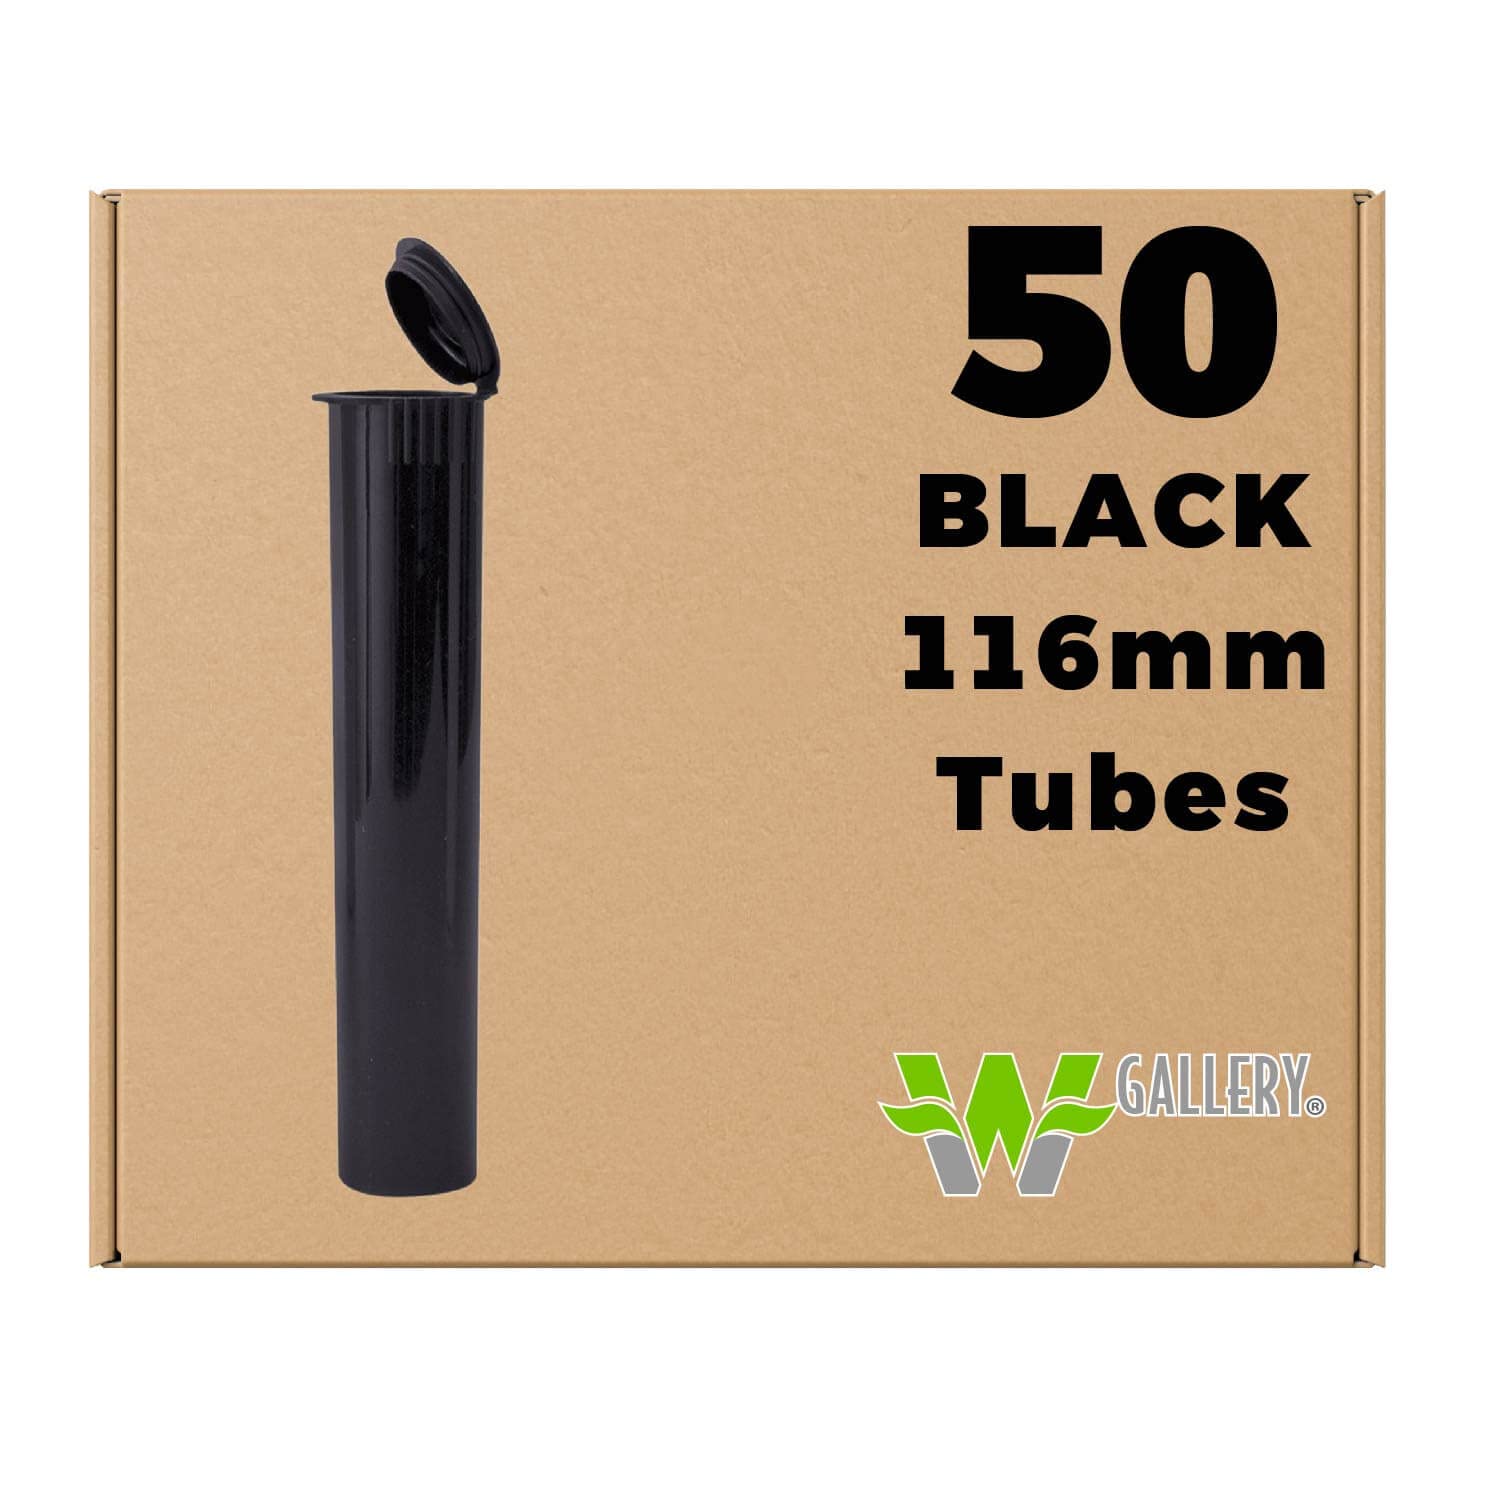 W Gallery 50 Black 116mm Tubes Pop Top Joint is Open Smell-Proof